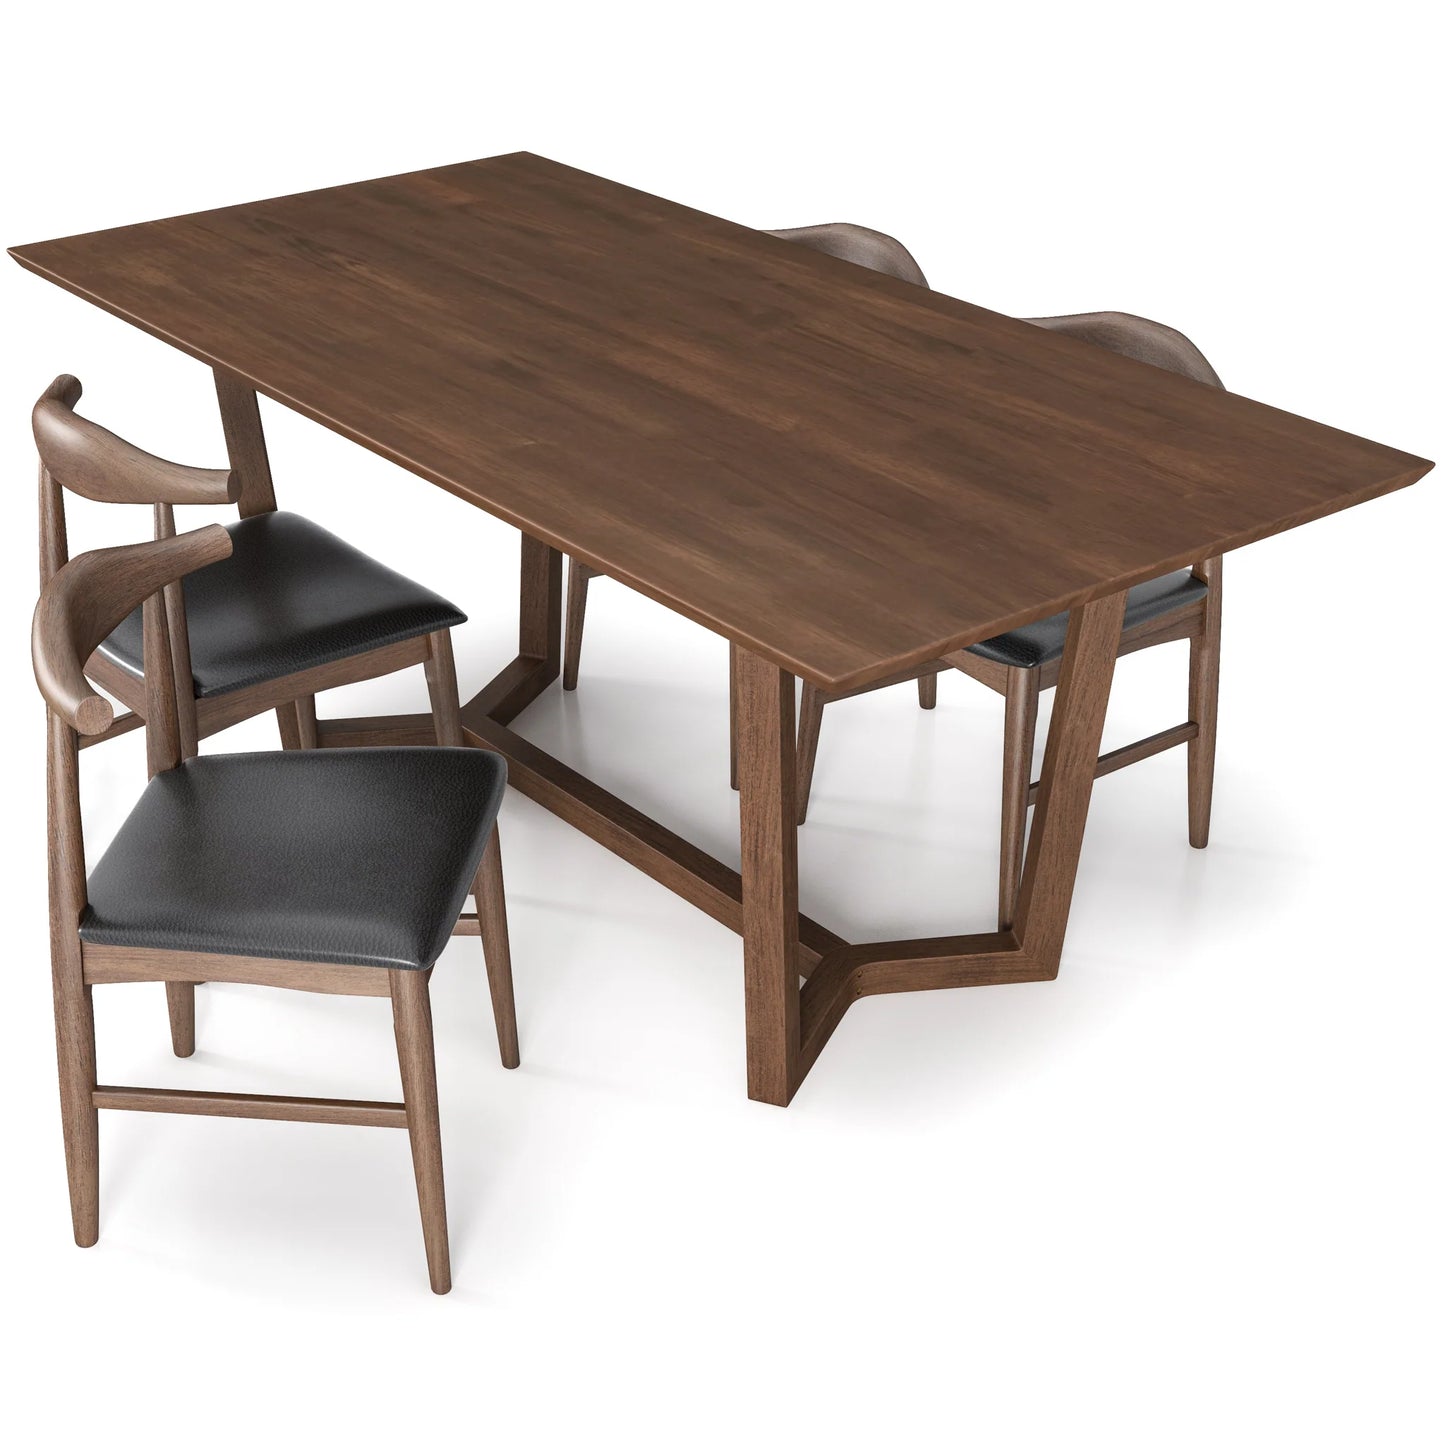 Rolda Dining set with 4 Winston Dining Chairs (Leather)